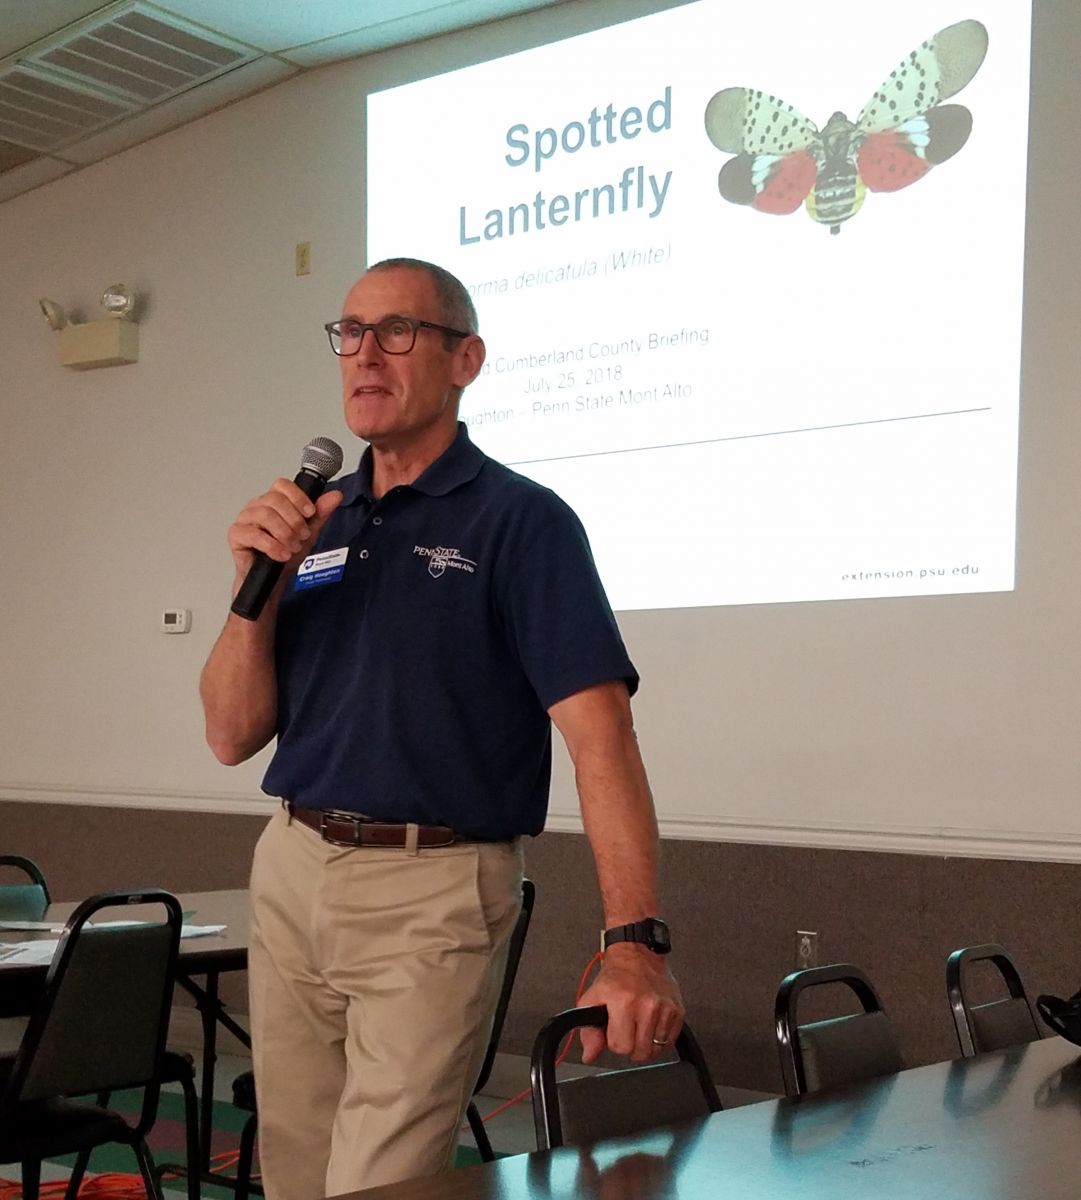 Craig Houghton Assistant Professor of Forestry at Penn State Mont Alto presents information on spotted lanternfly